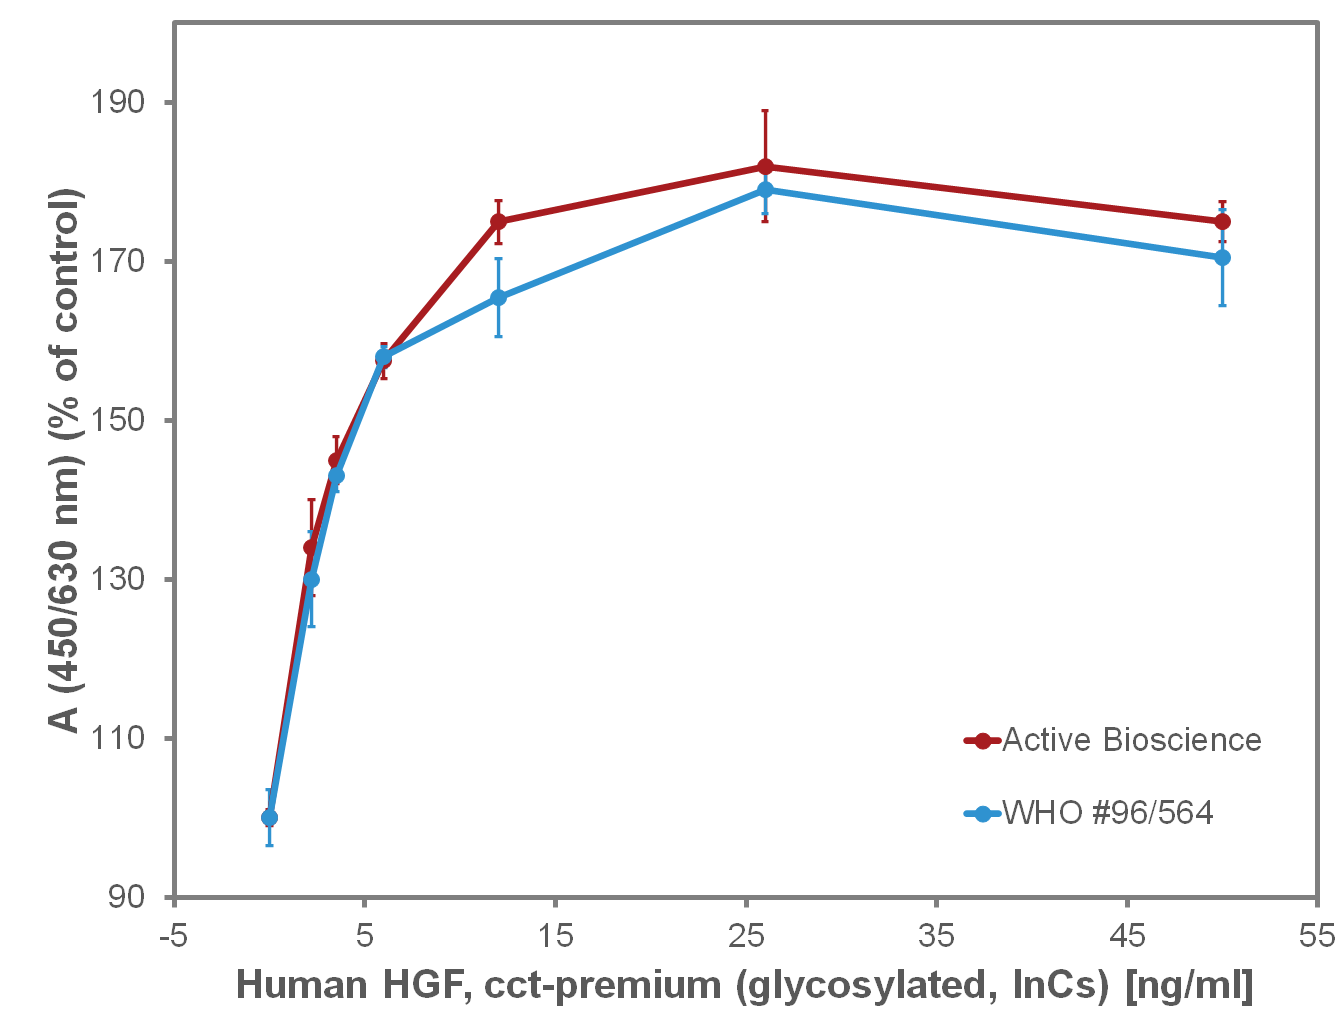 Fig 2: Measurement of scattering activity in MDCK cells by recombinant human HGF, cct-premium and the WHO standard 96/564. Values are the means (�SD) of triplicate determinations and expressed as percentage of control.